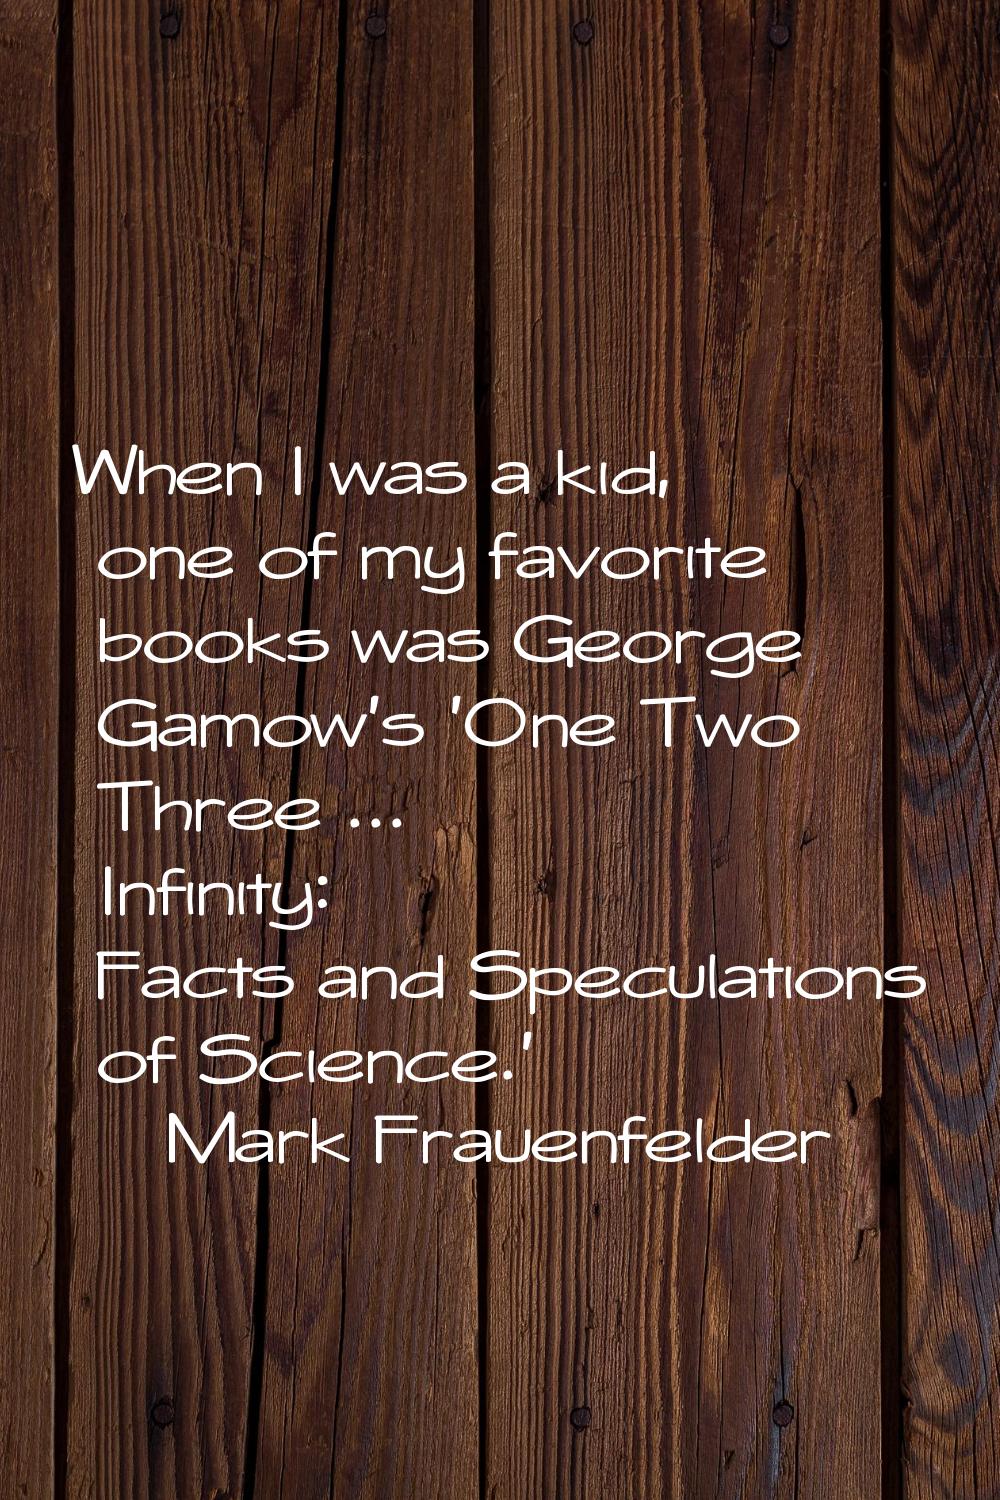 When I was a kid, one of my favorite books was George Gamow's 'One Two Three ... Infinity: Facts an